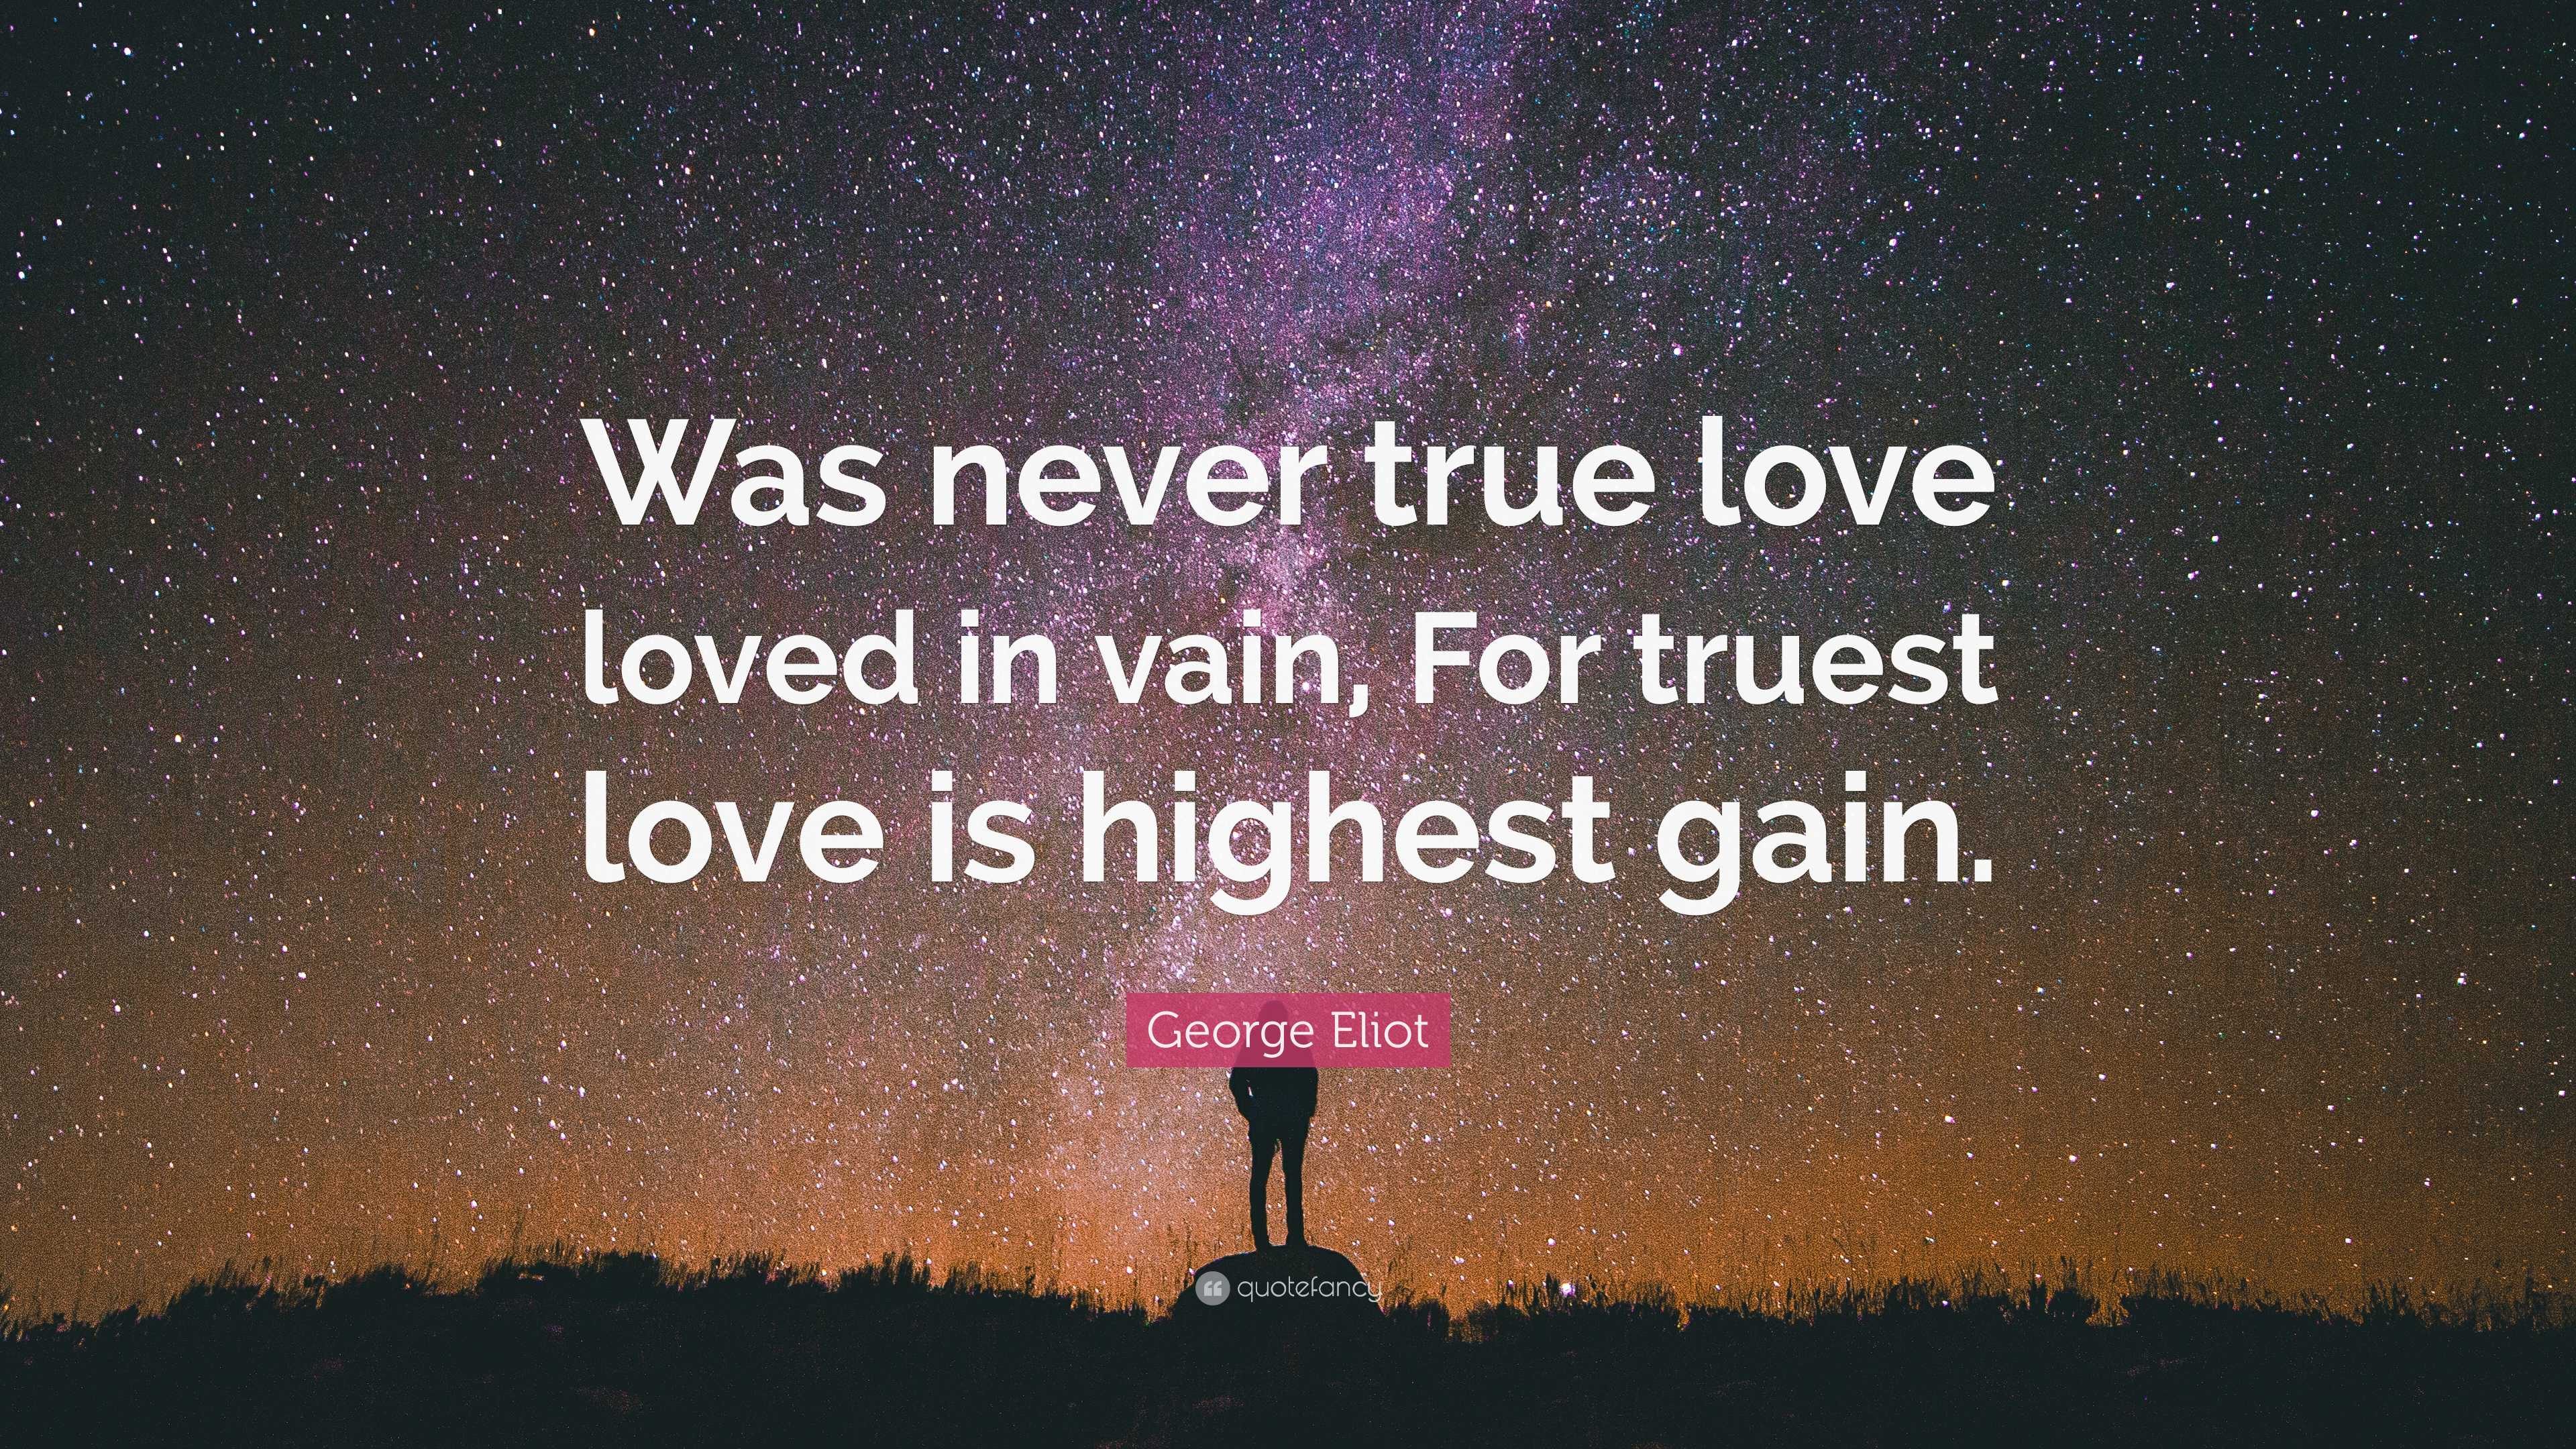 TOP 25 TRUE LOVE NEVER ENDS QUOTES (of 56)